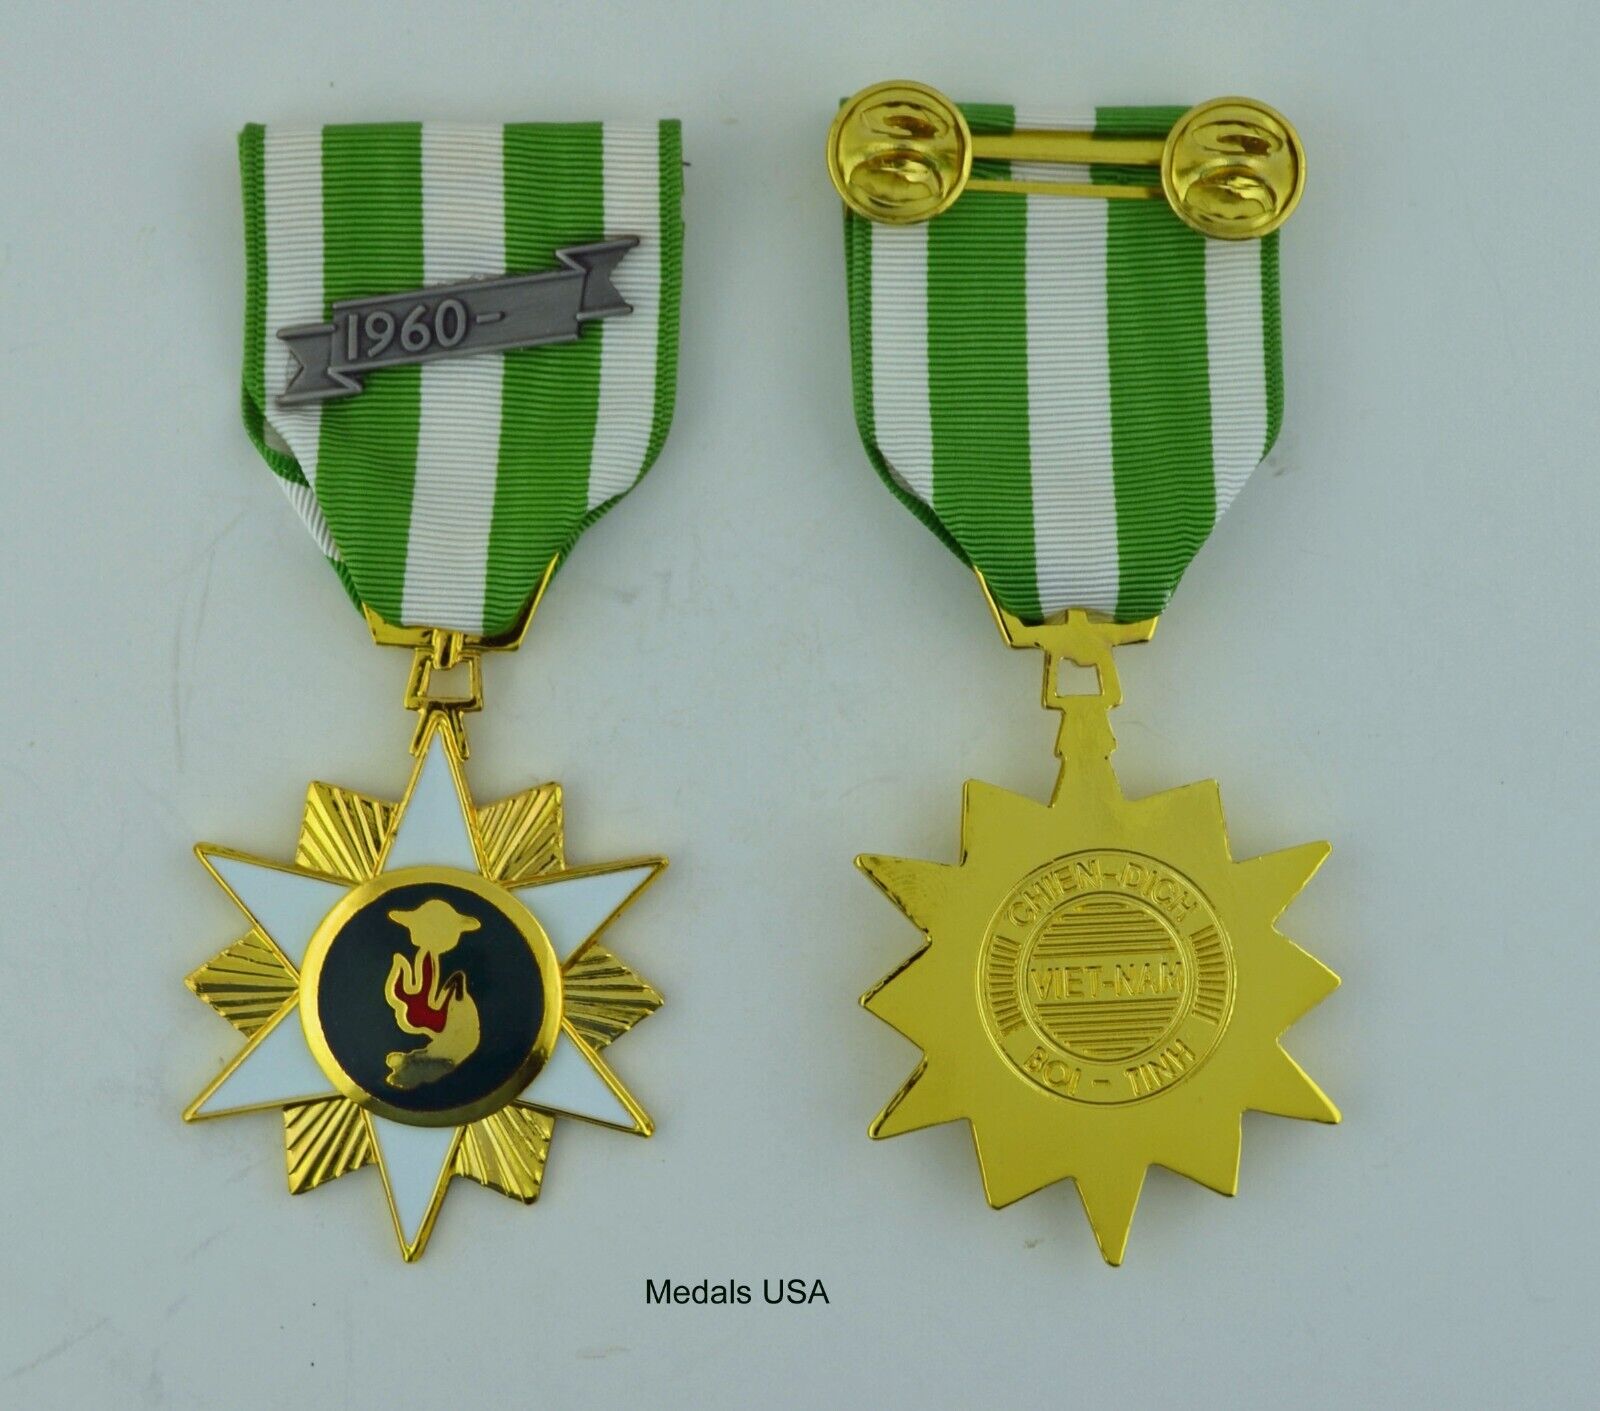 Republic of Vietnam Campaign Medal - Vietnam War Service - VCM - With Mounting